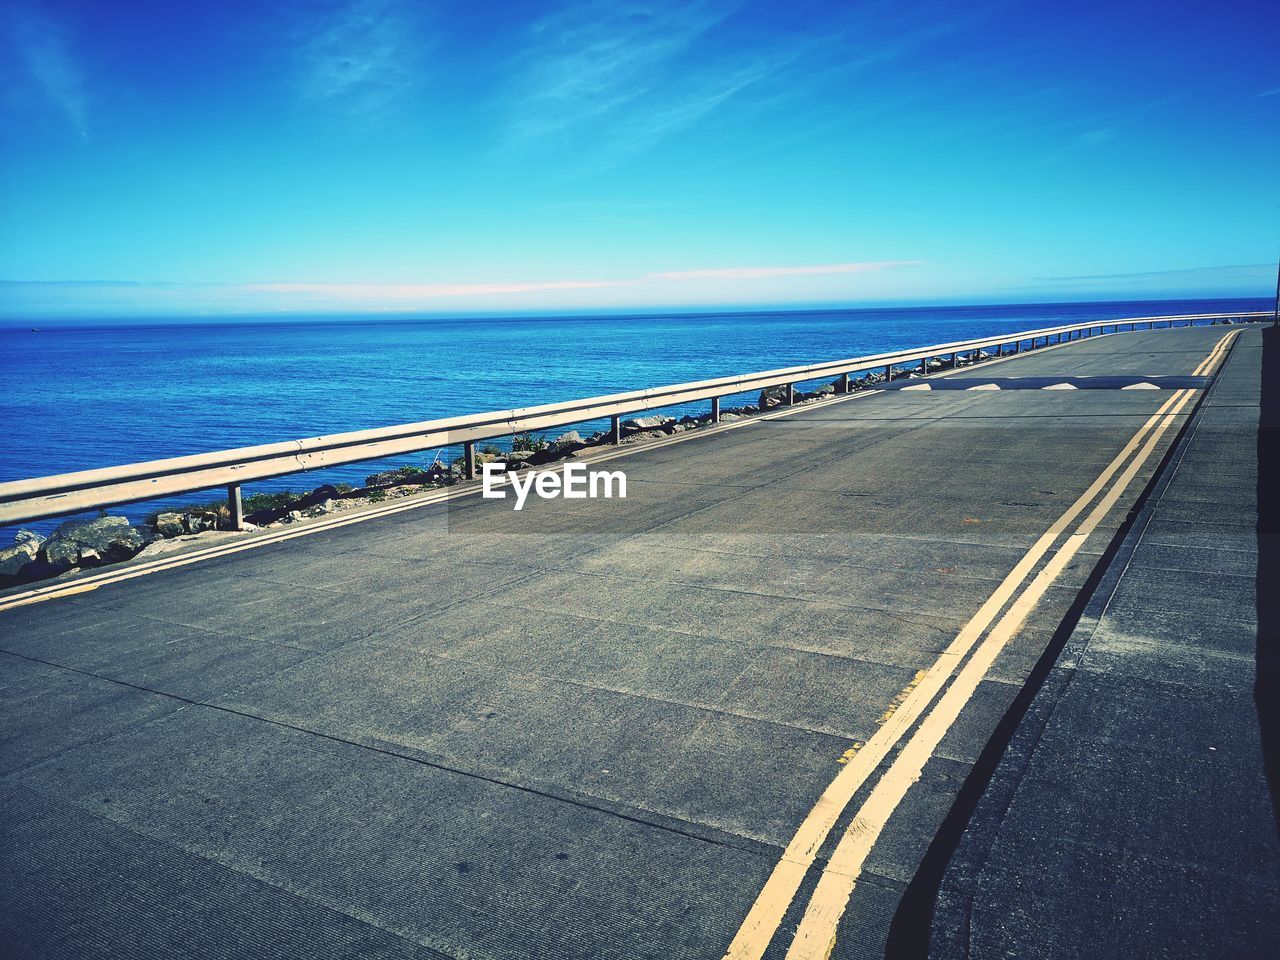 horizon, sky, transportation, sea, road, water, horizon over water, nature, coast, blue, ocean, road marking, no people, travel, marking, day, scenics - nature, symbol, mode of transportation, outdoors, the way forward, beauty in nature, city, dusk, sunlight, railing, street, clear sky, travel destinations, highway, asphalt, motion, architecture, land, beach, tranquil scene, reflection, tranquility, cloud, motor vehicle